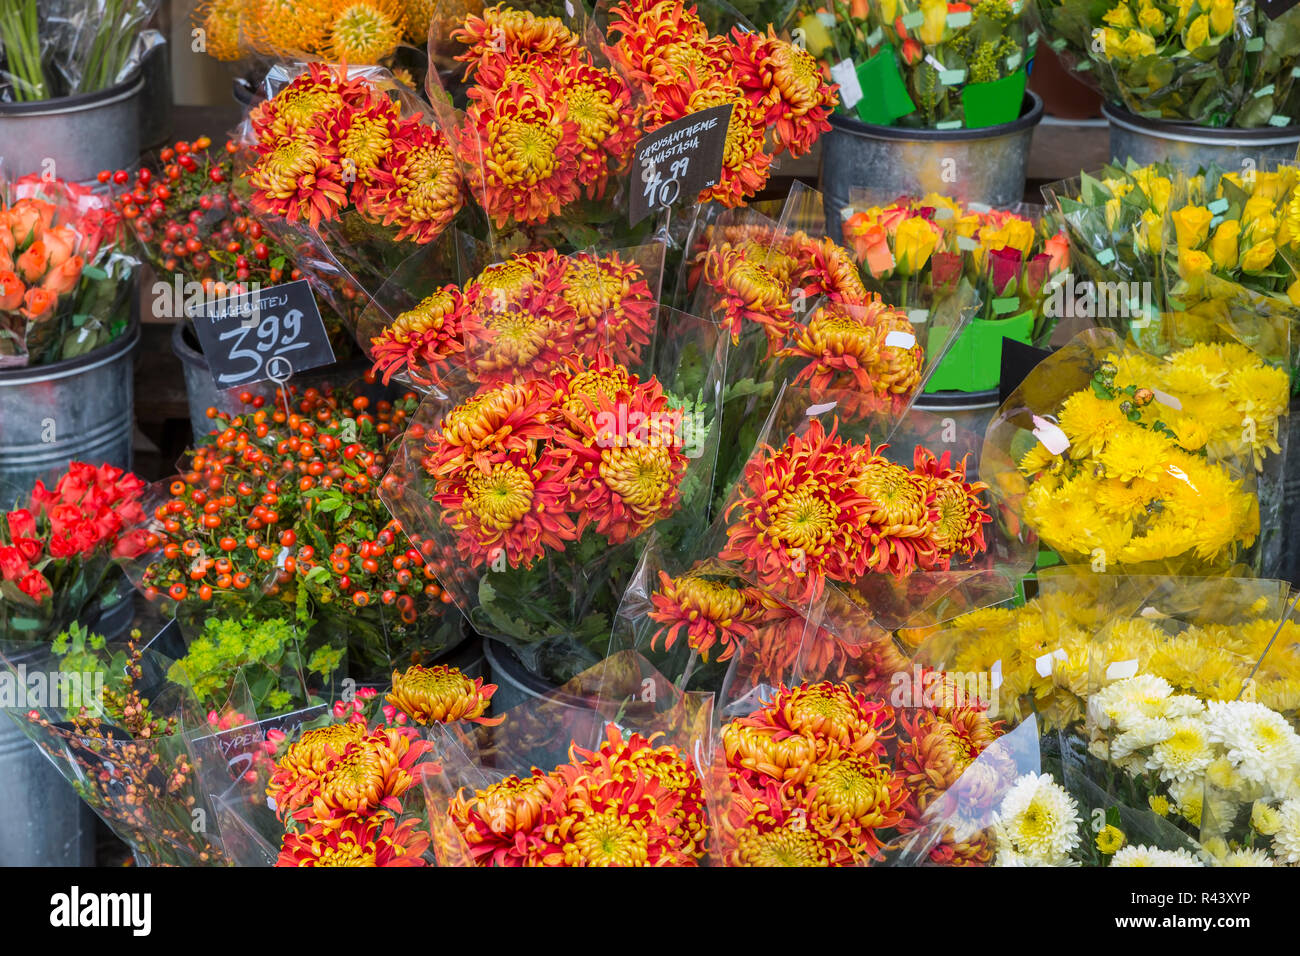 selection of flowers in front of a flower shop Stock Photo